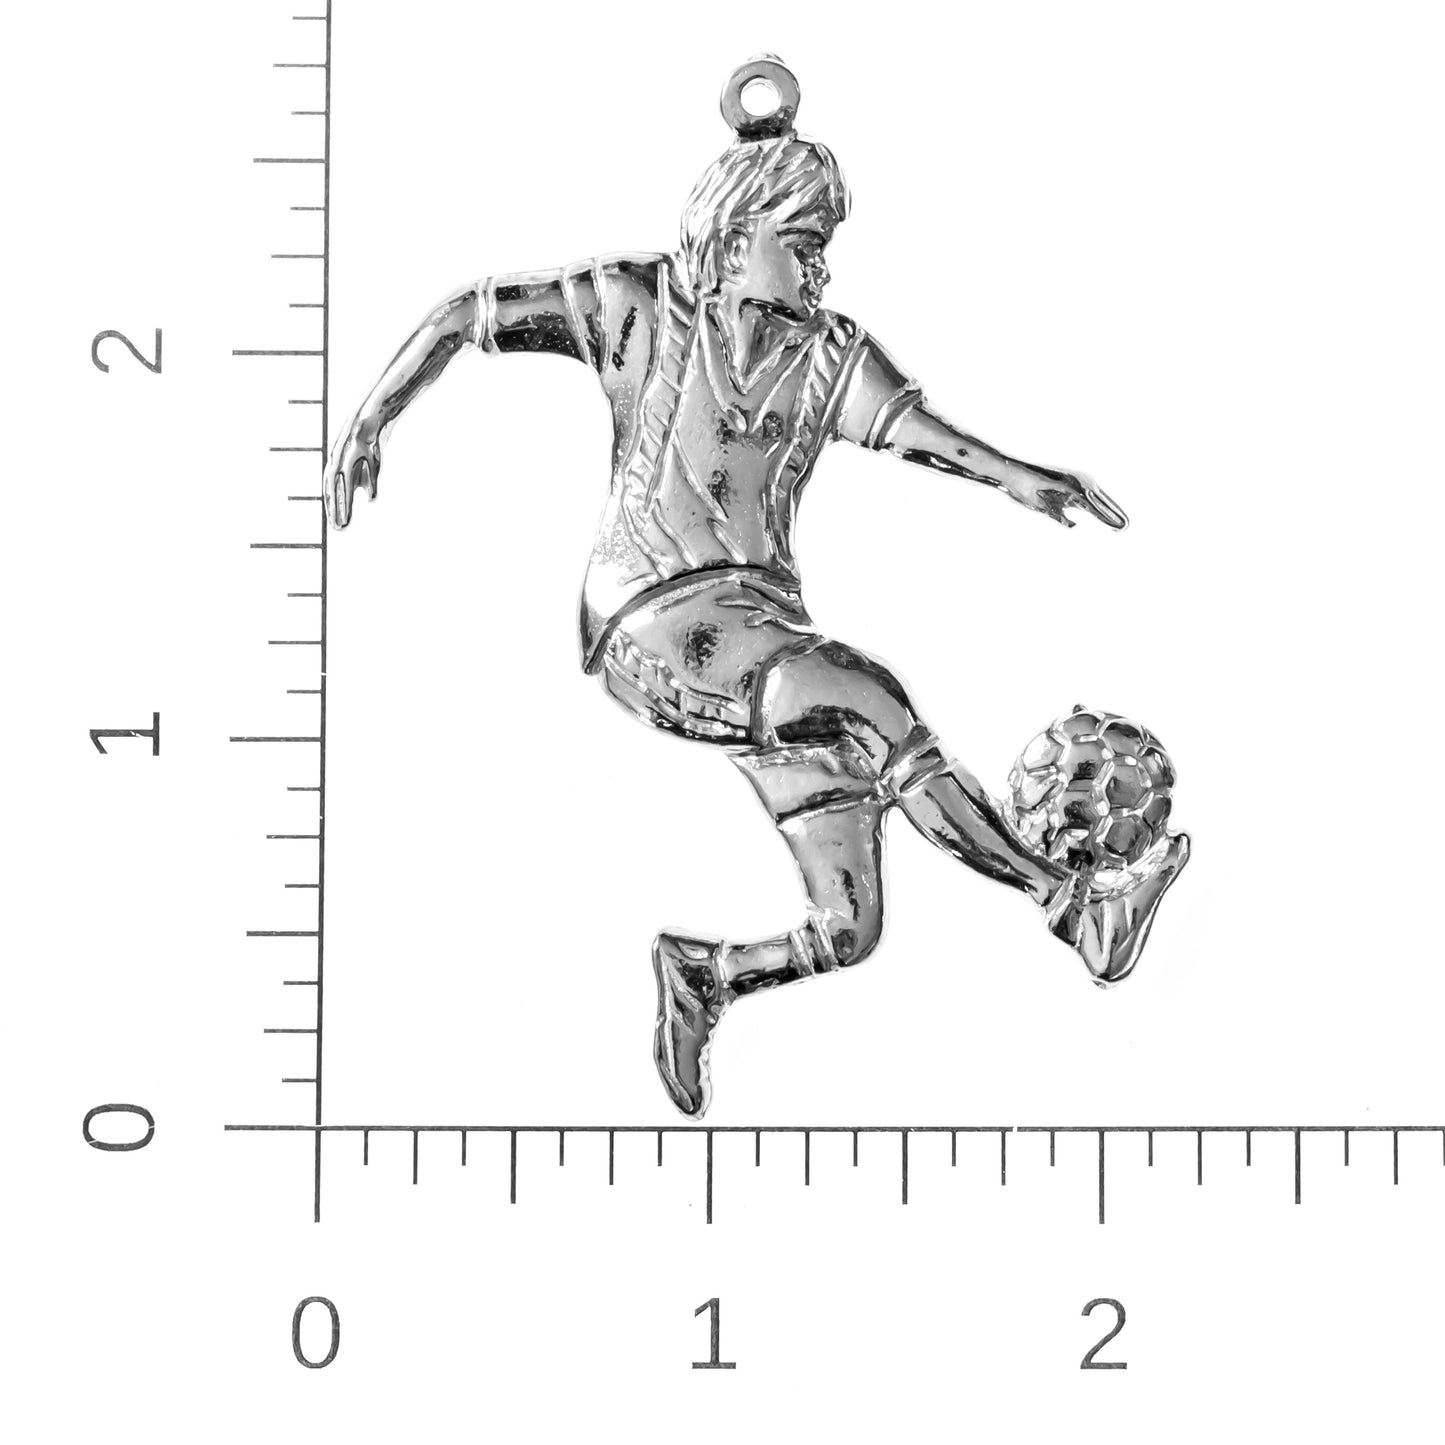 Silver Pewter Metal Soccer Player Ceiling Fan Pull Top Gift Ideas - House of Morgan Pewter